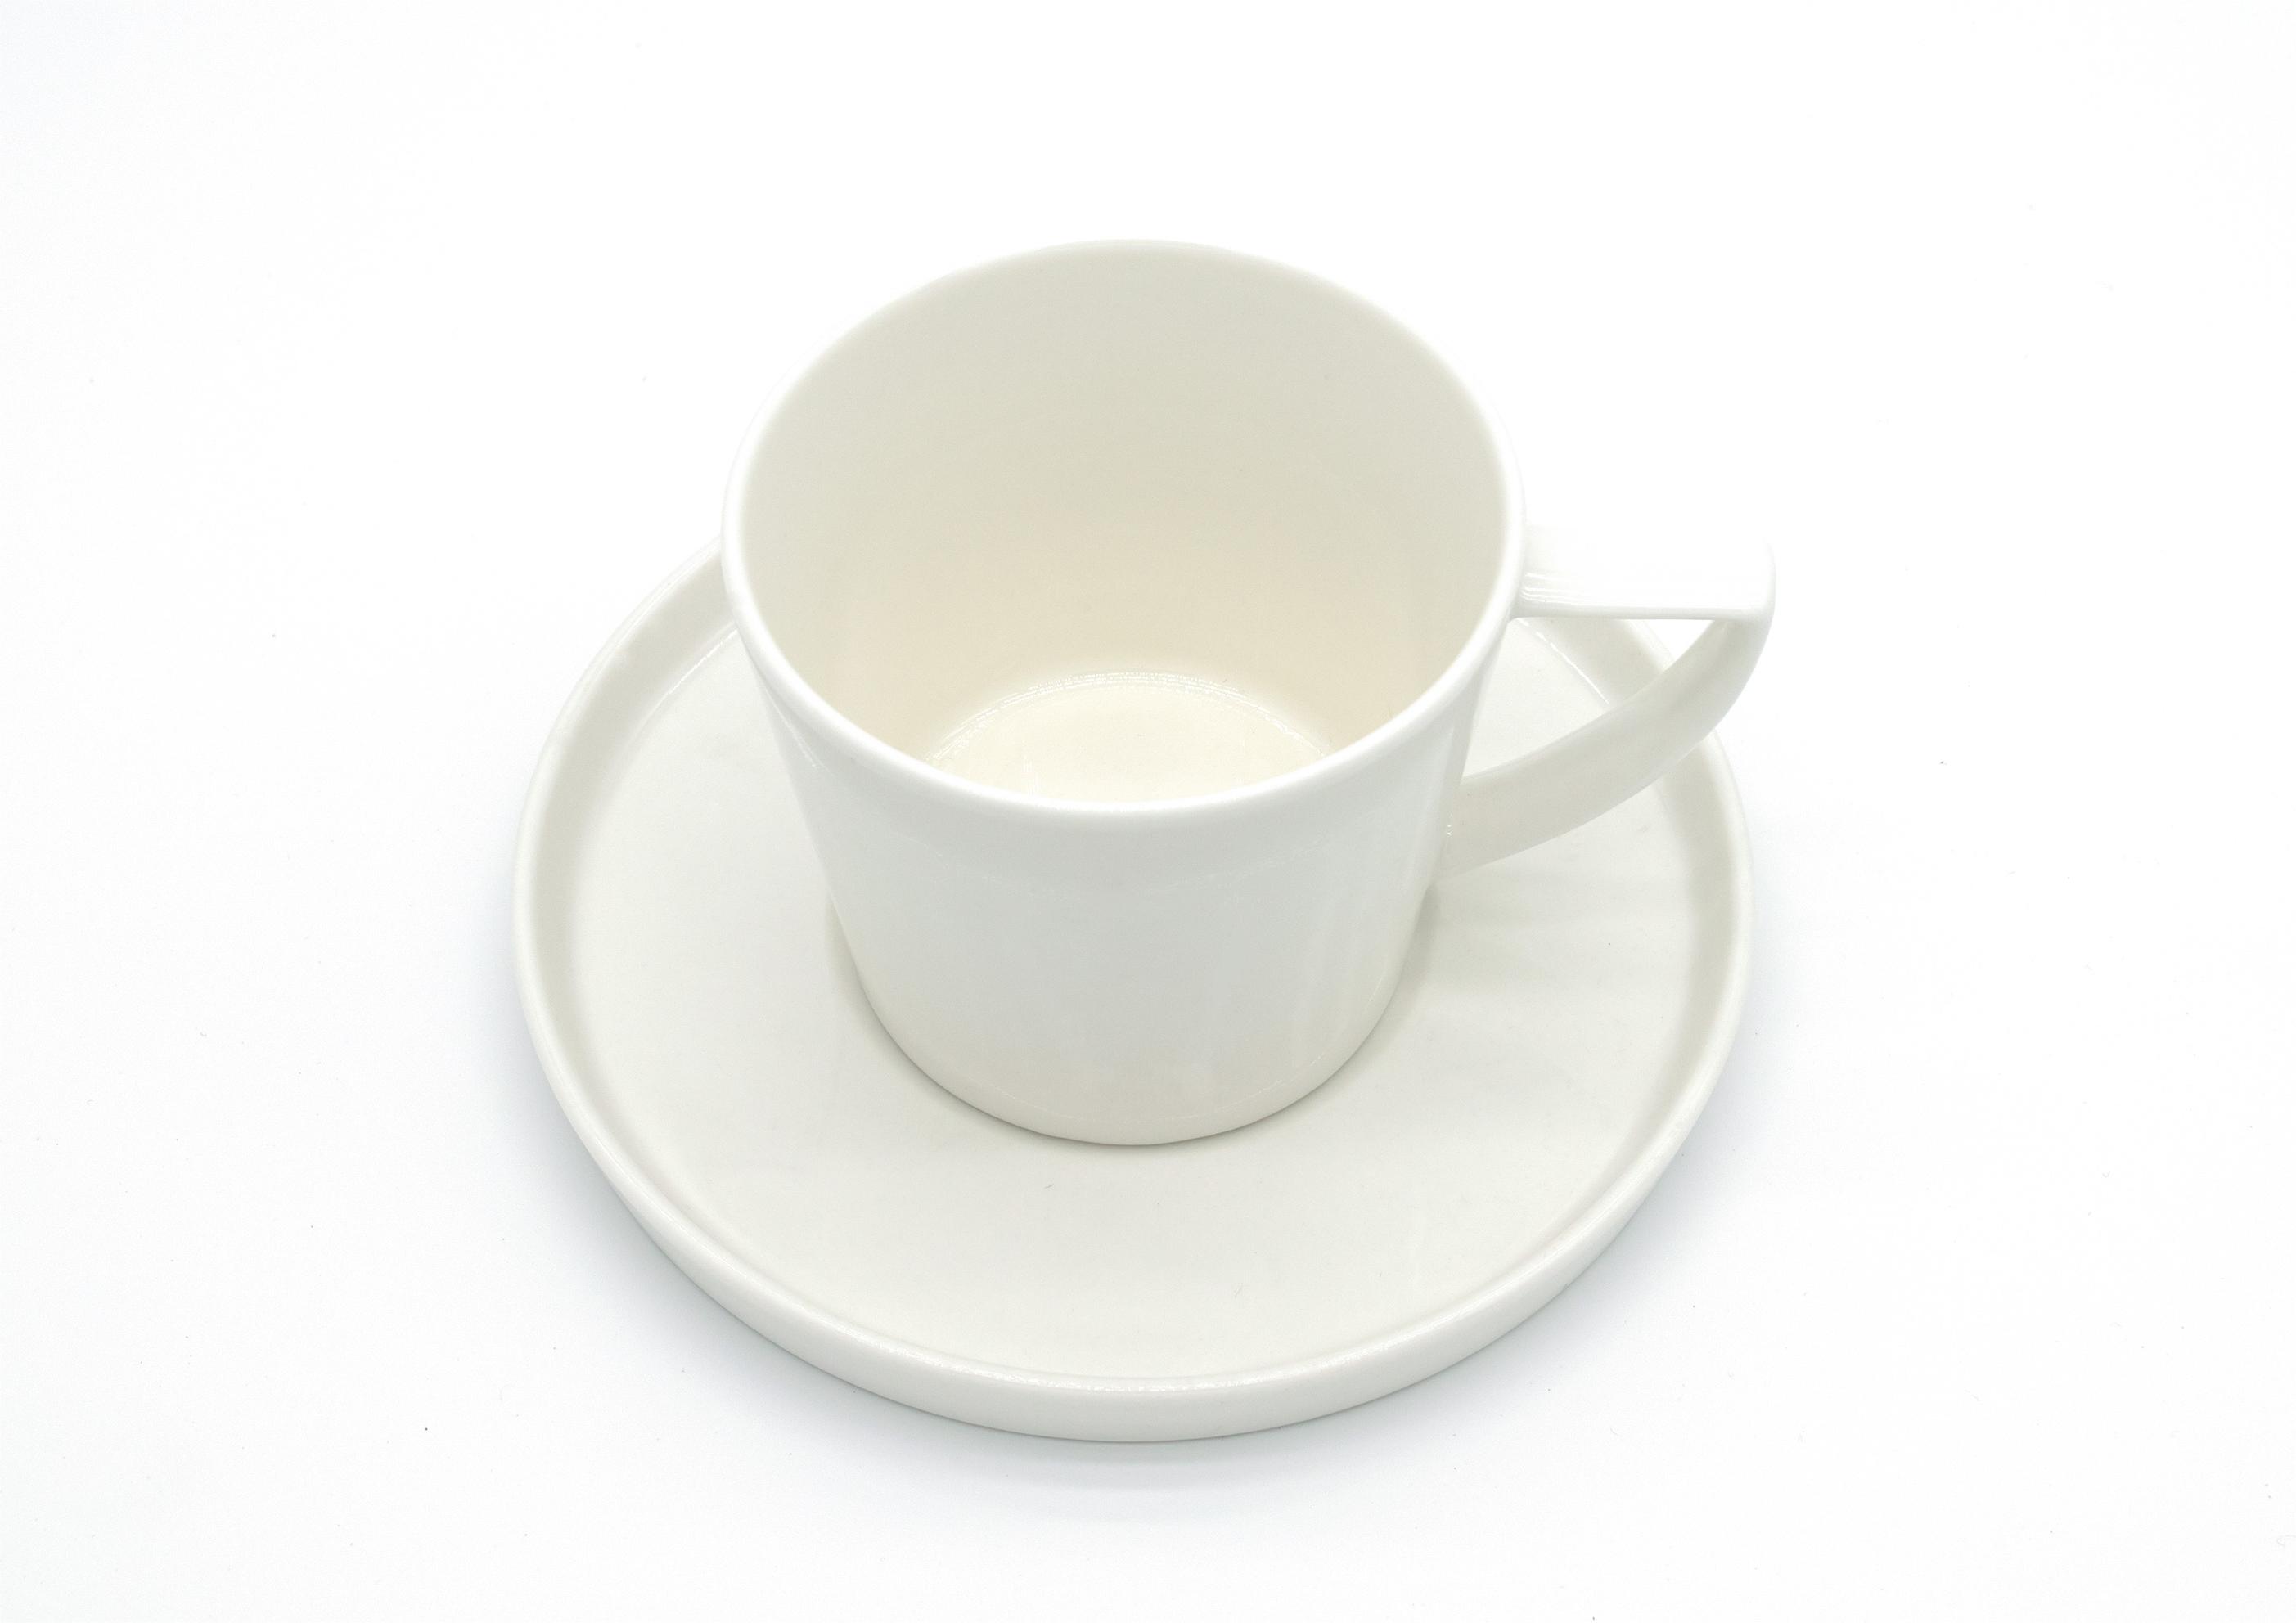 Ceramic cup and saucer